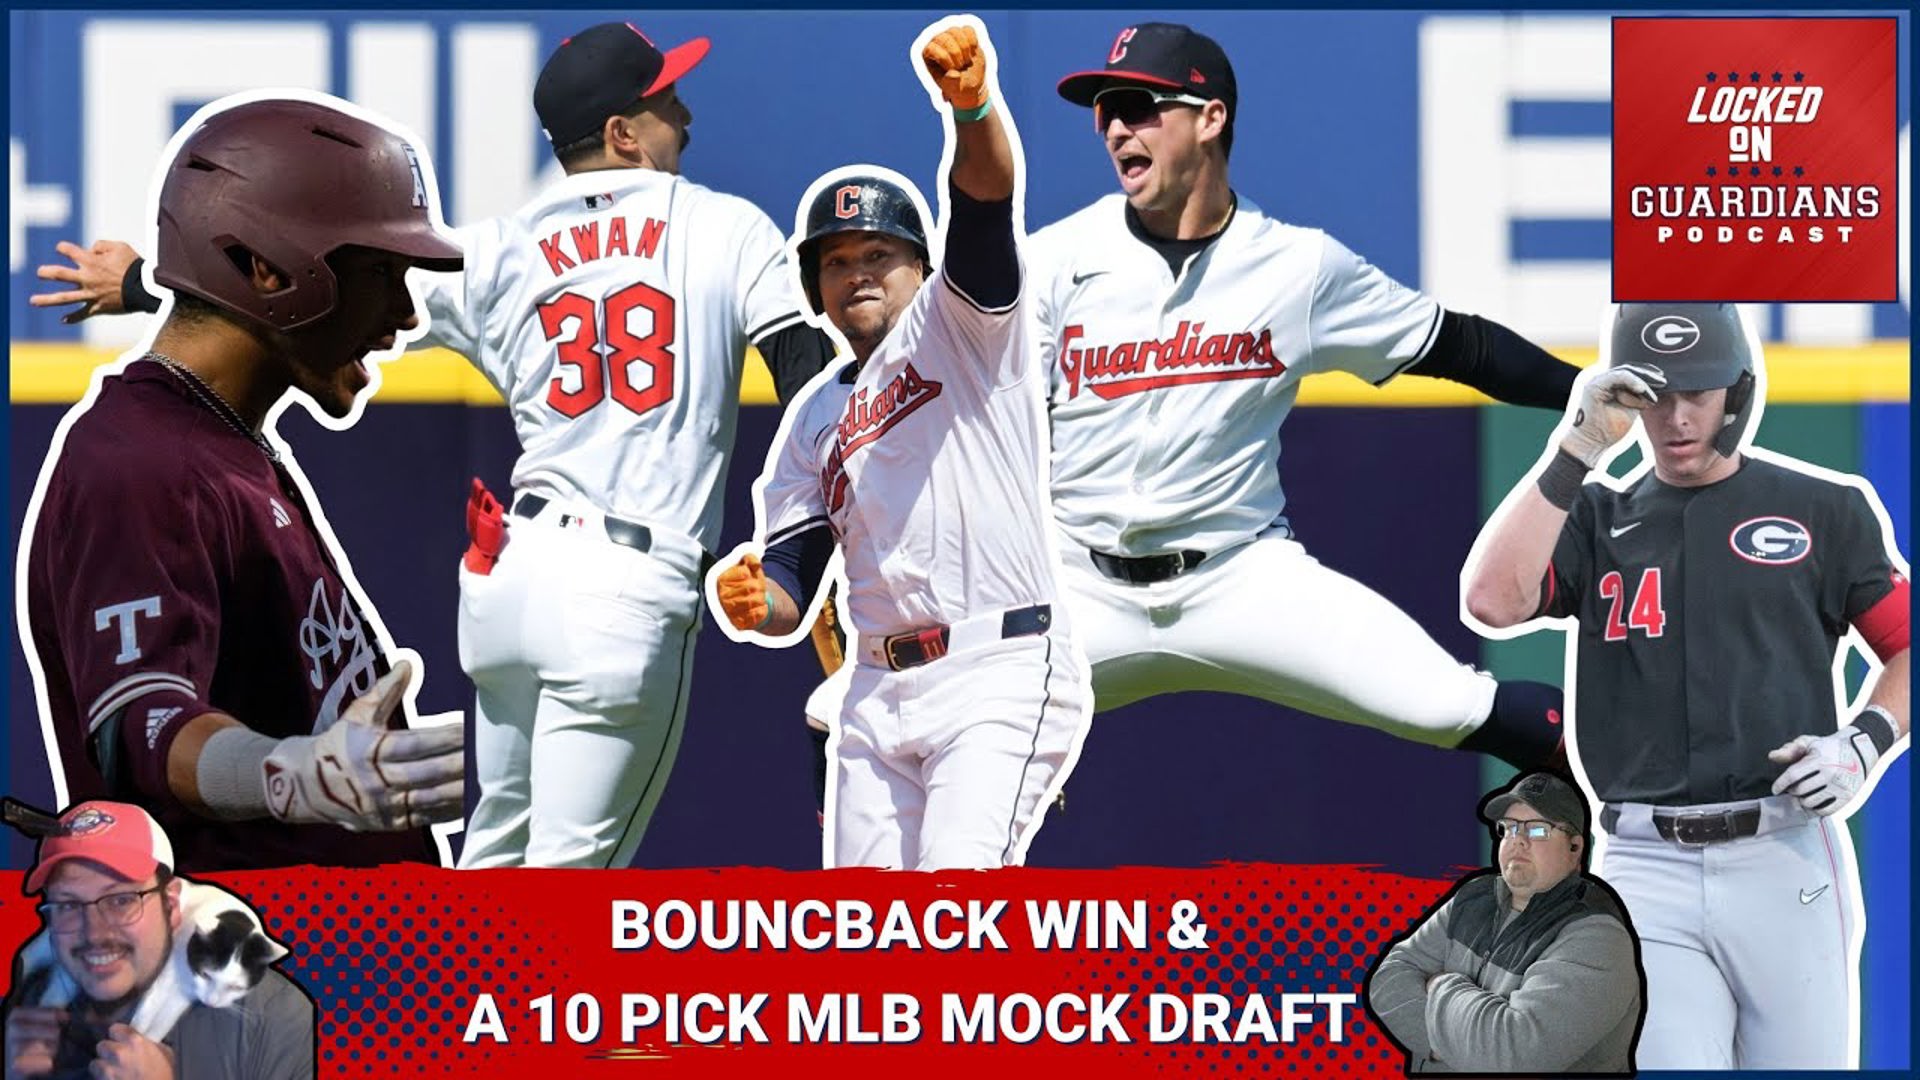 In honor of the NFL draft, we do a 10 pick MLB mock draft, giving our selections for each pick, including the Guardians at #1 overall.